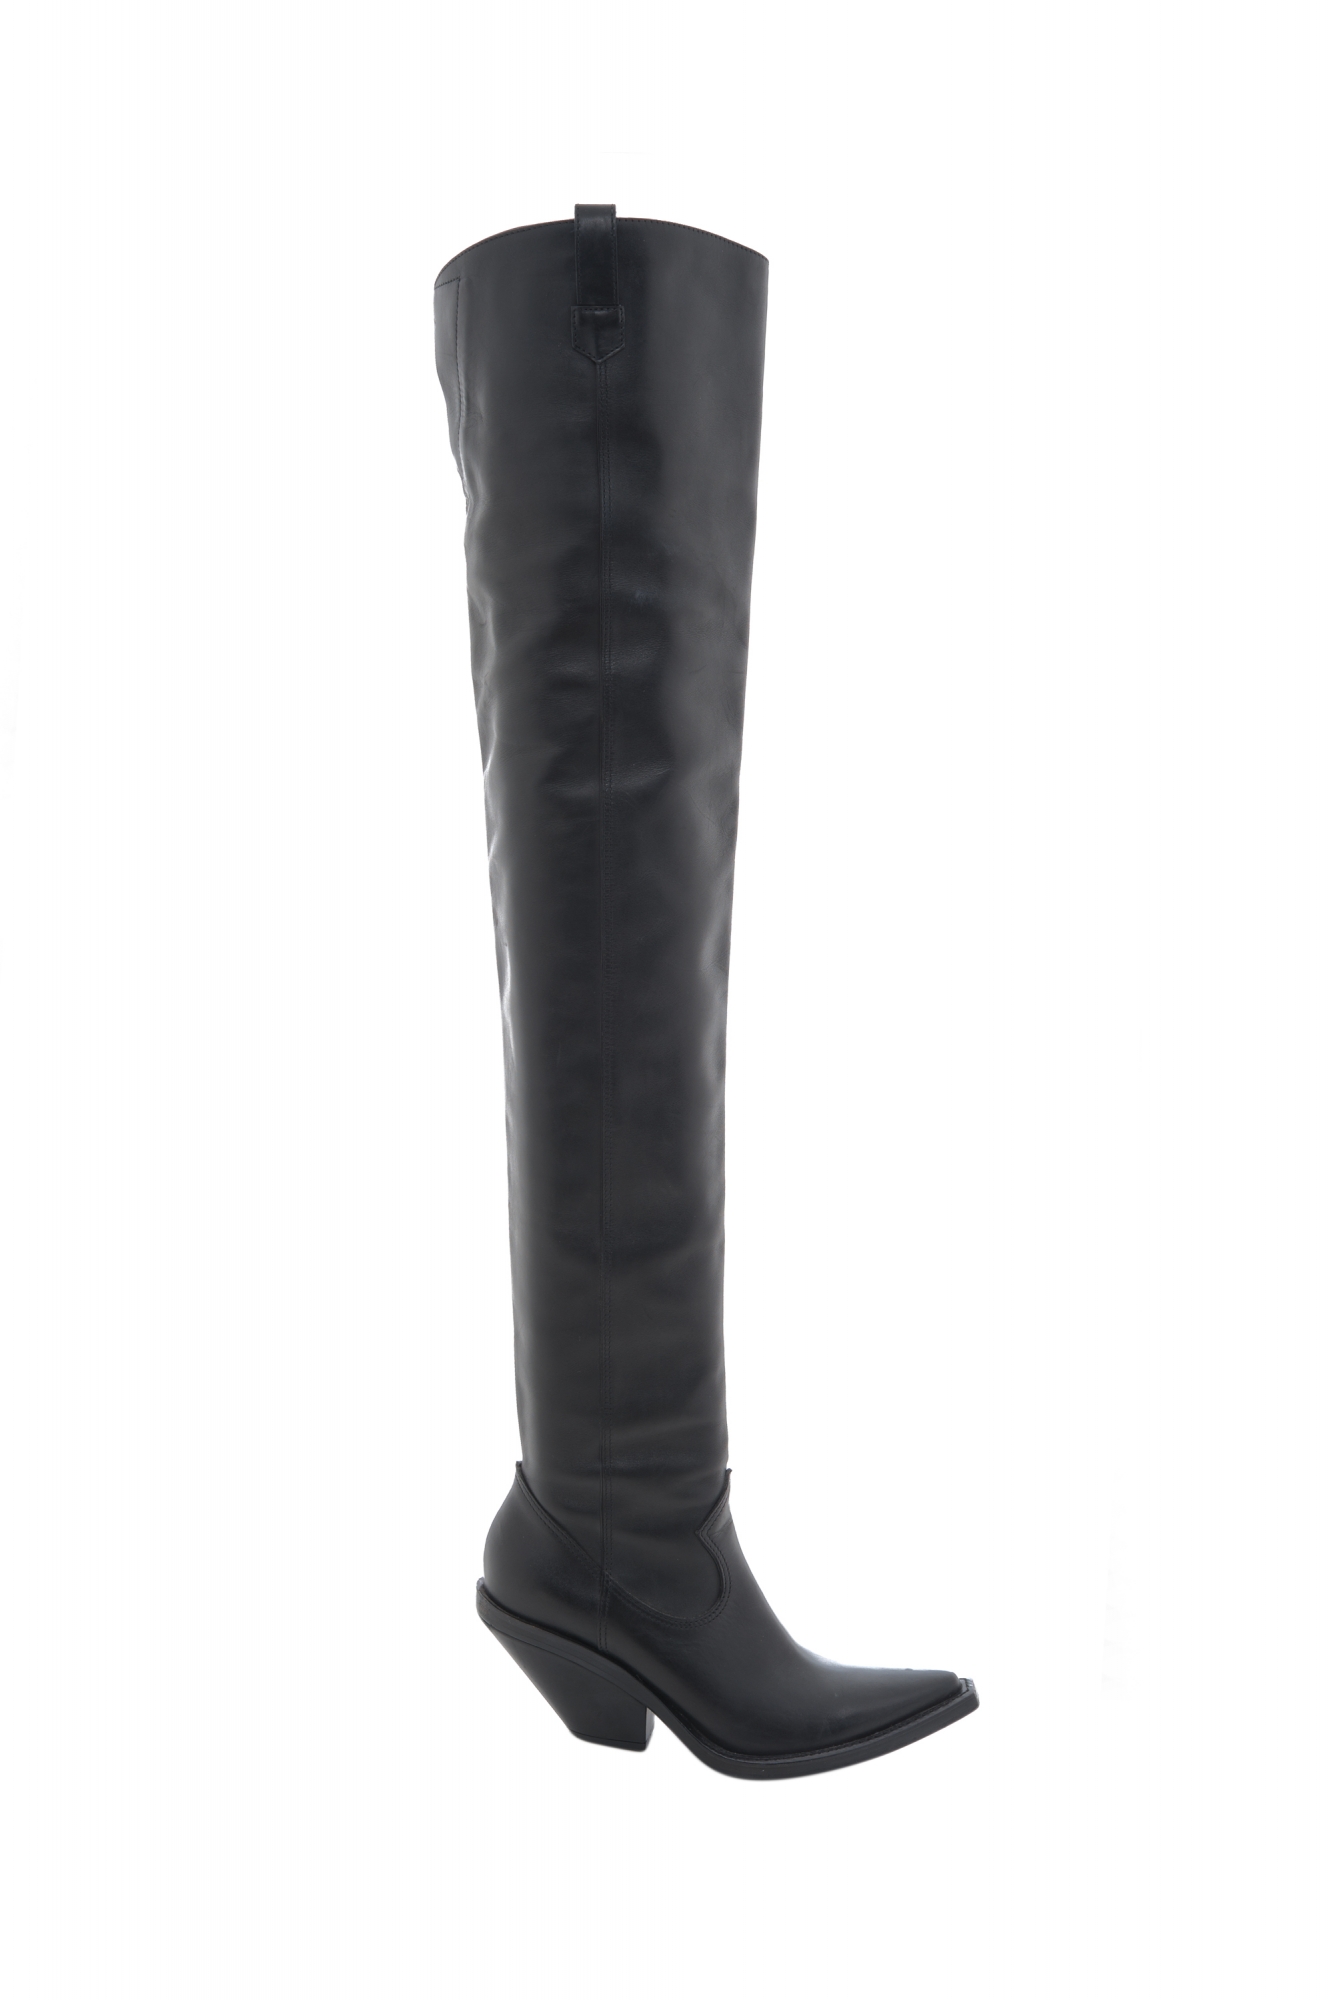 thigh high givenchy boots